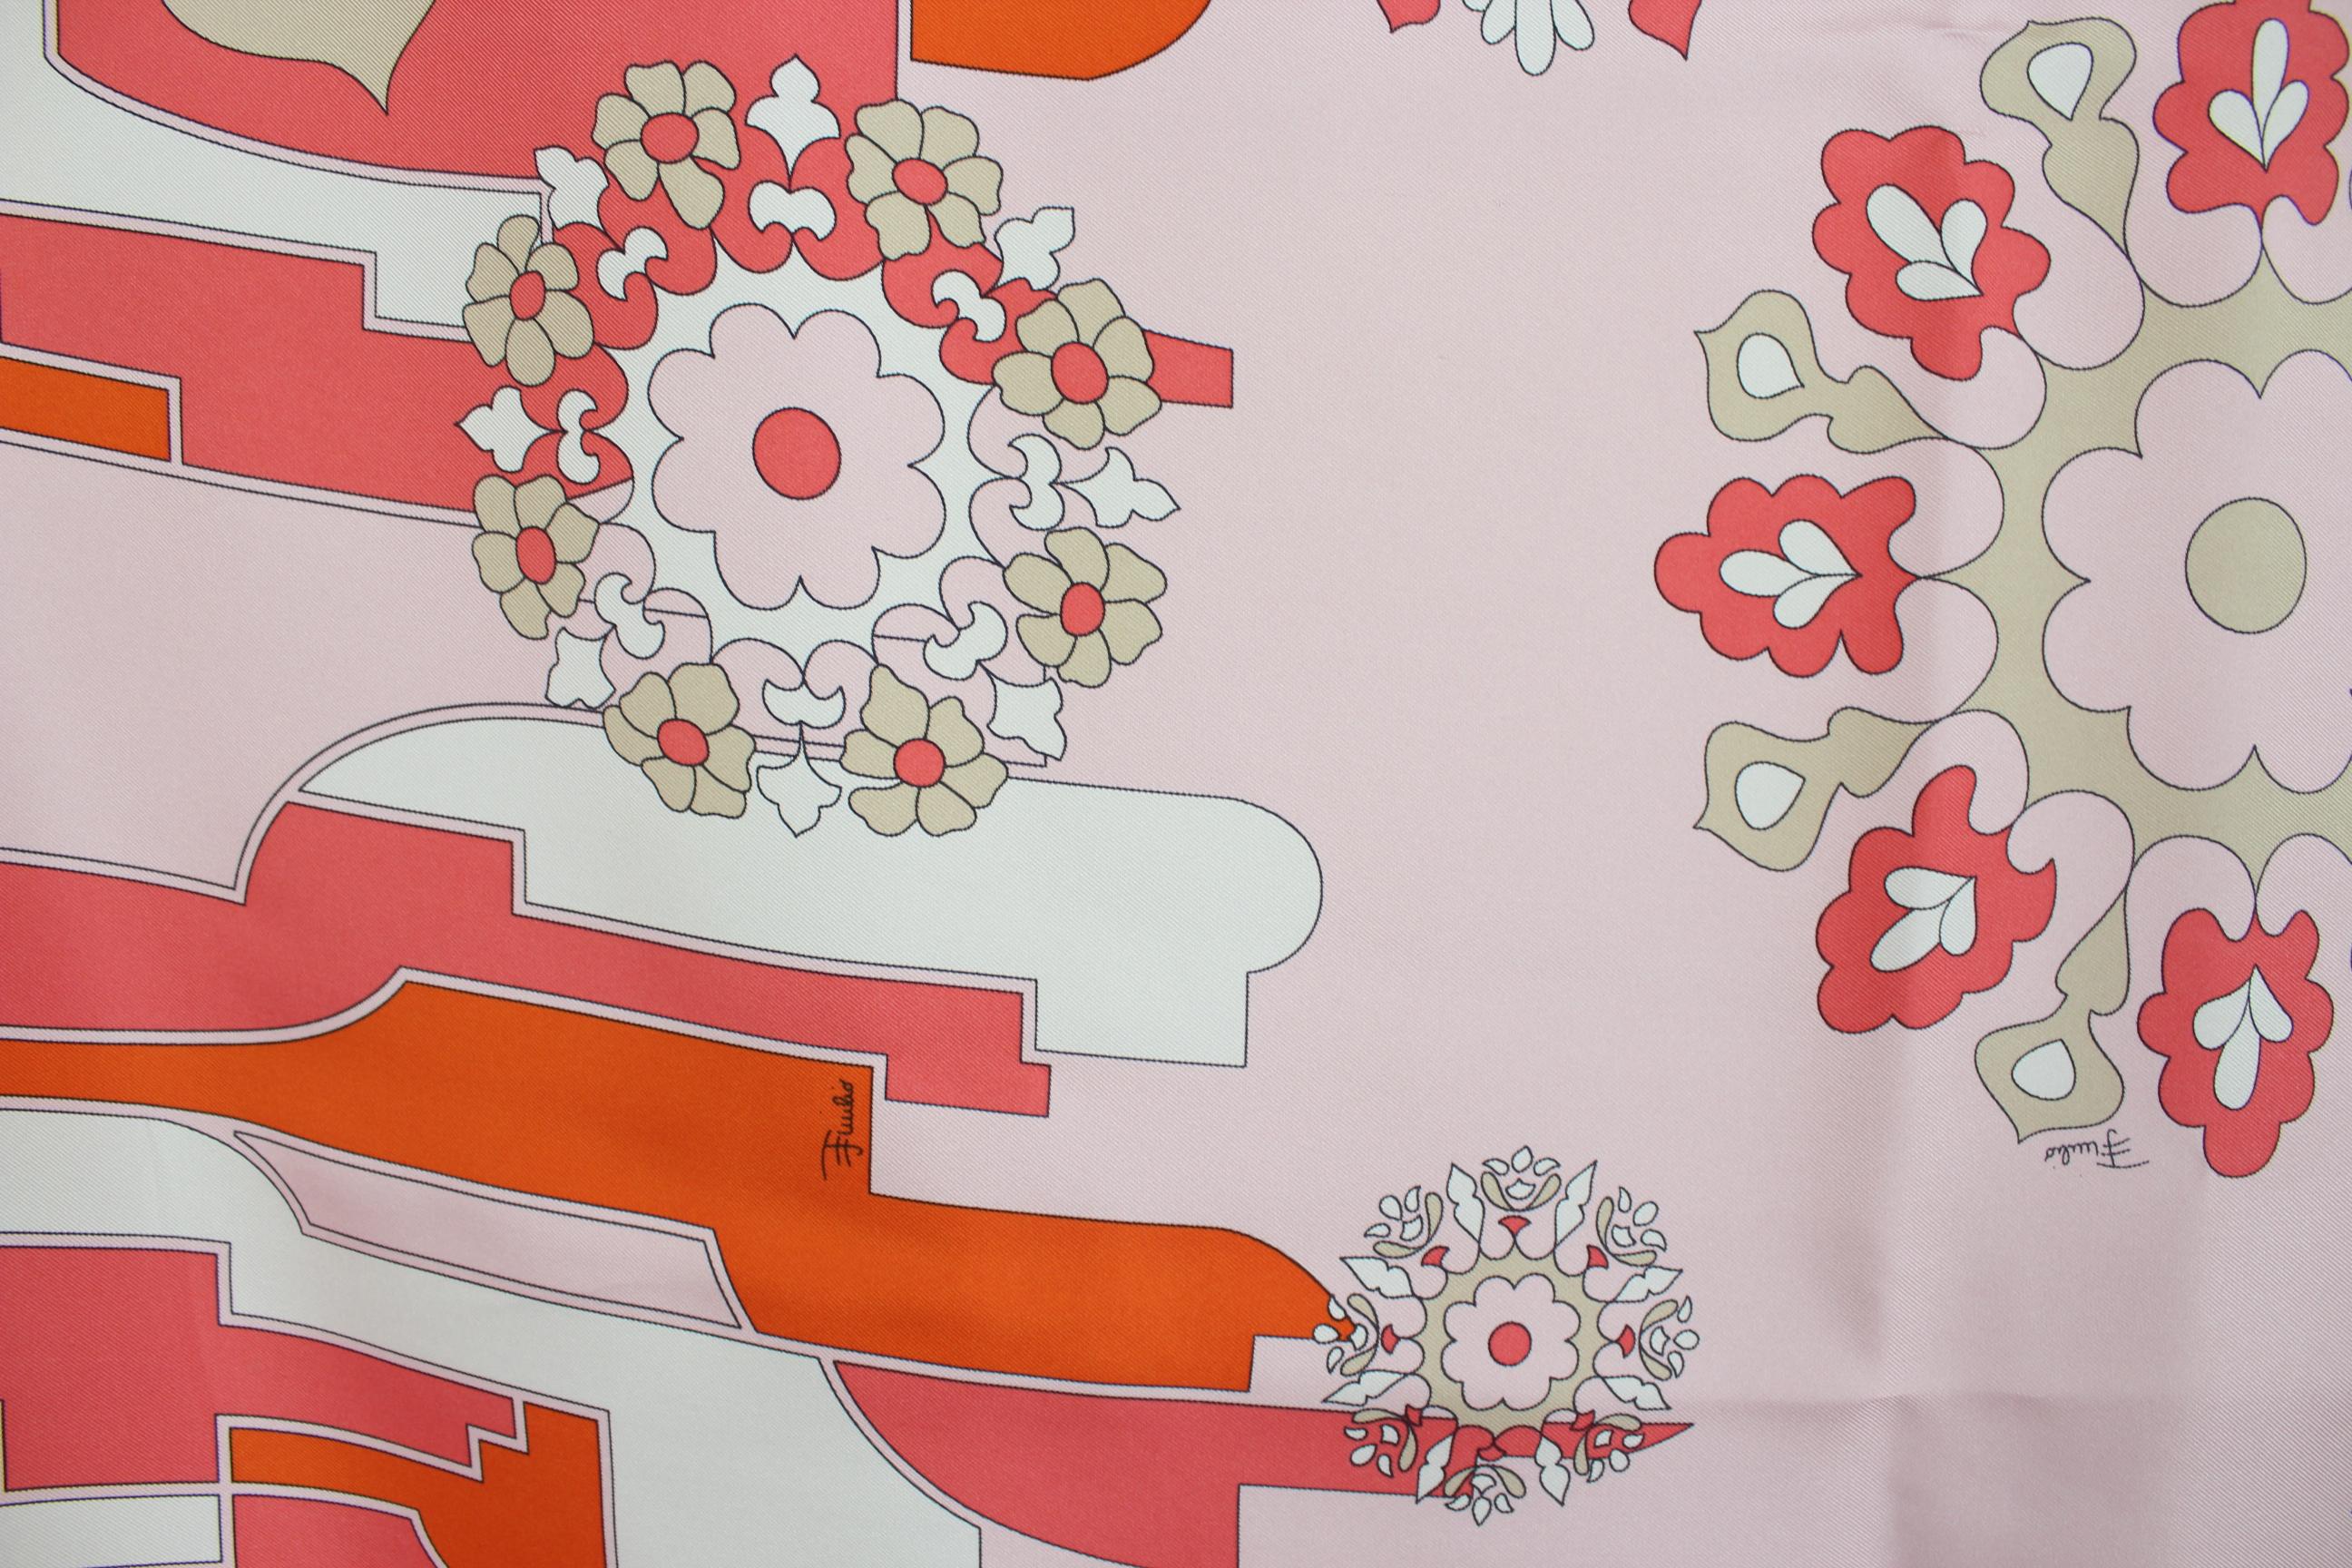 Emilio Pucci elegant vintage 90s scarf. Pink and orange floral motif. 100% silk. Made in Italy. Excellent vintage conditions.

Measures: 88 x 88 cm